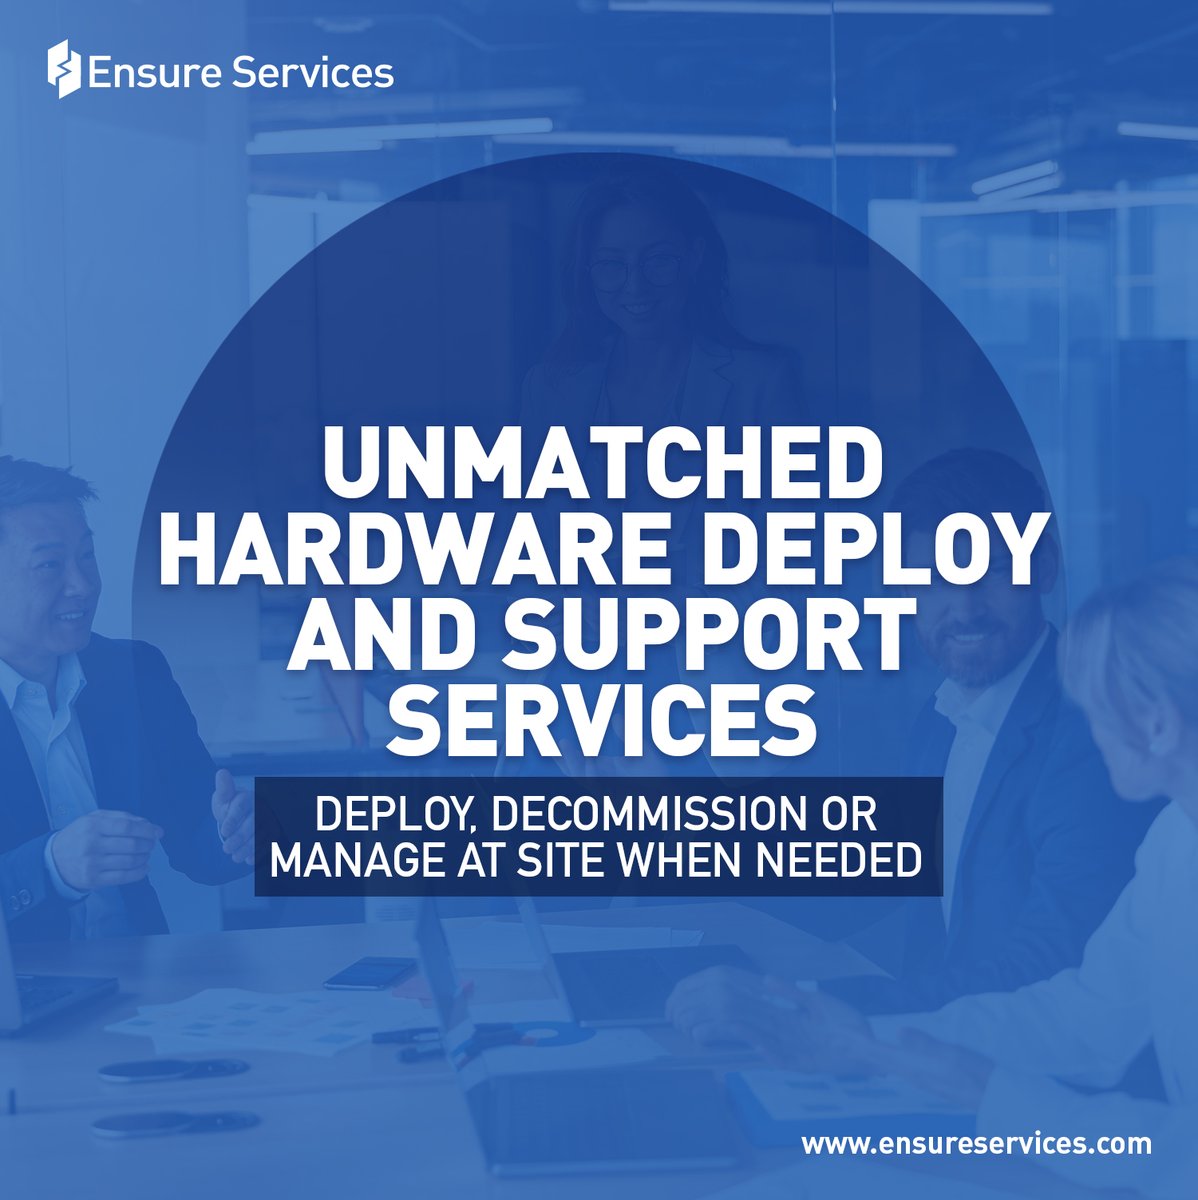 Our top-of-the-line #HardwareDeploy & #Supportservices offer optimal flexibility & convenience for deploying, decommissioning & managing #hardware assets directly at your site. Experience seamless #enterprisesolutions with #EnsureServices.
#ITSolutionsProvider #ITSolutionsProvide